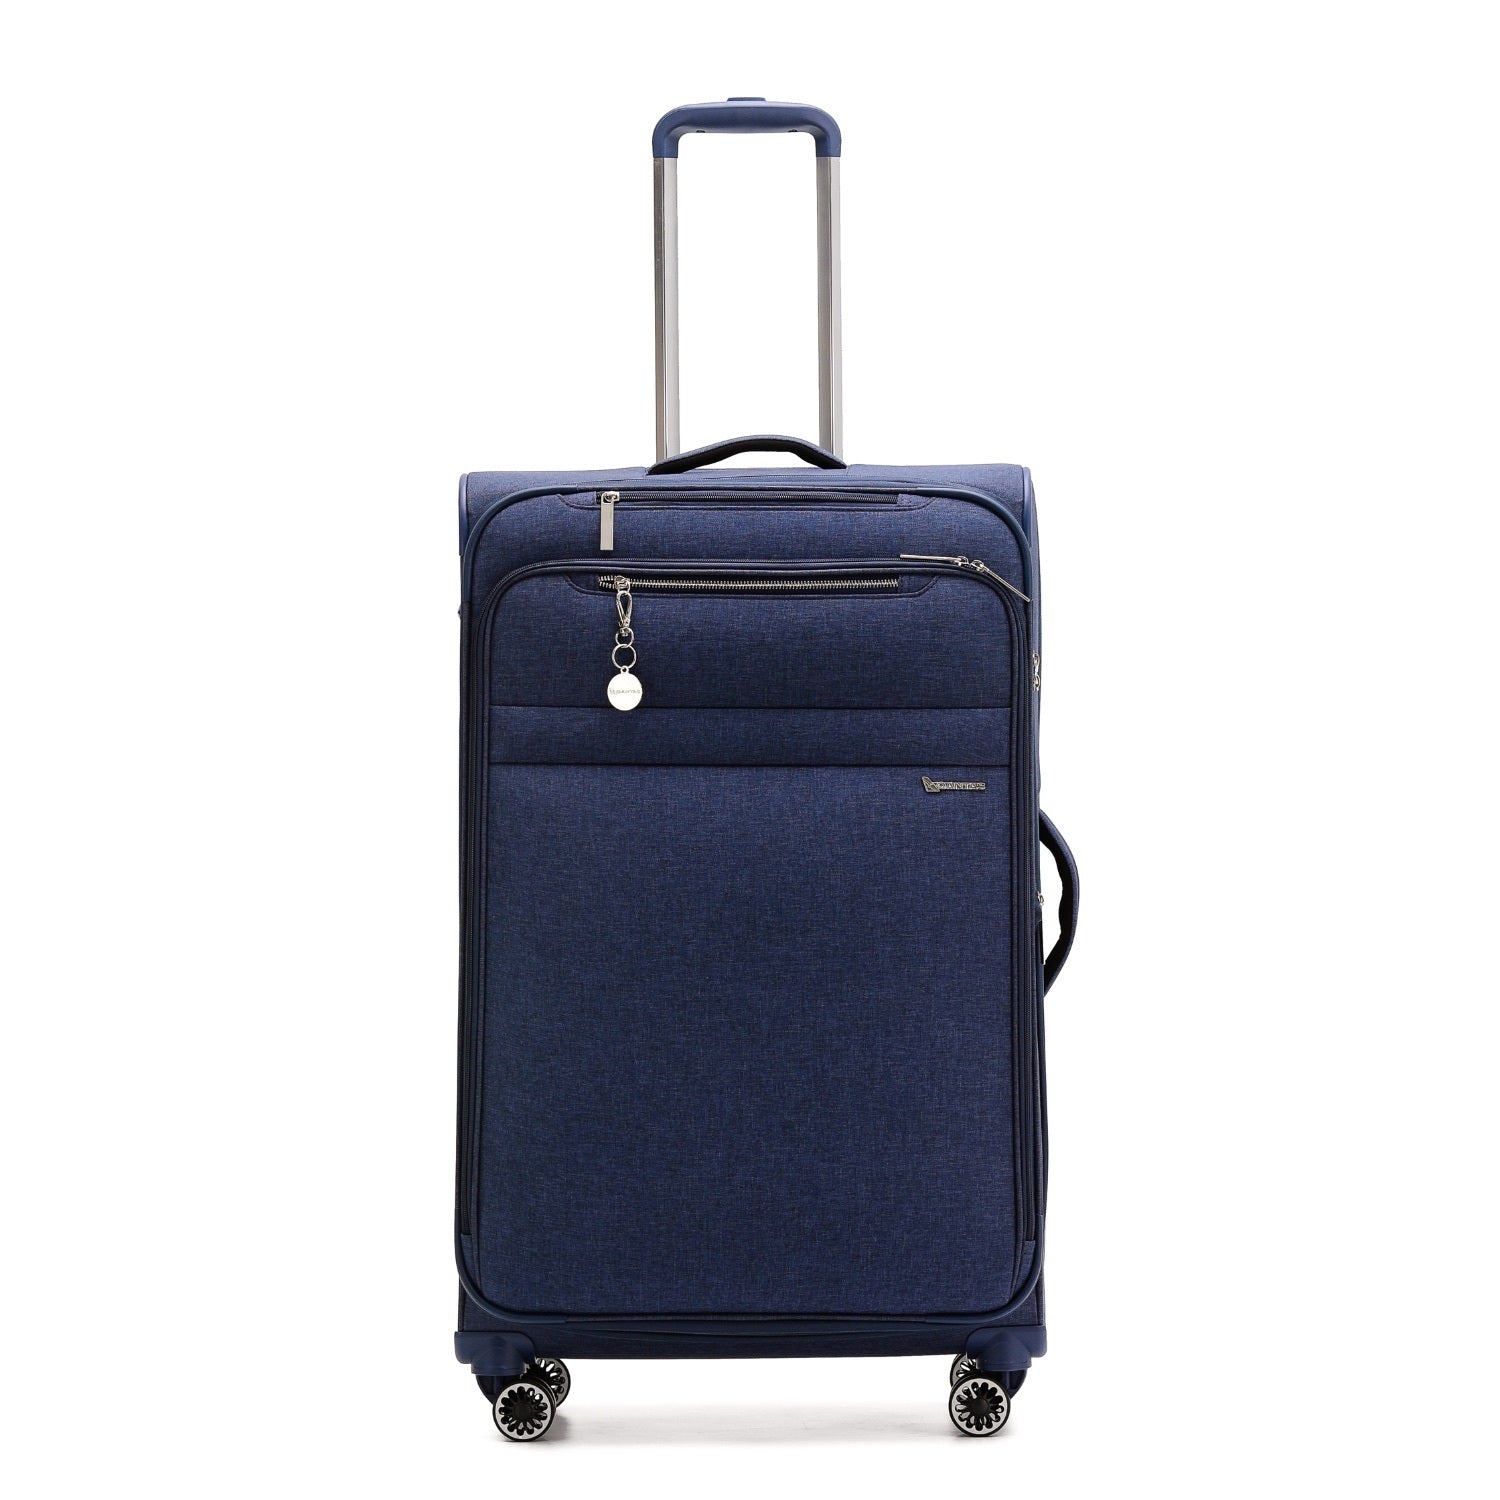 Qantas - QF400 81cm Large Adelaide Soft sided spinner - Navy